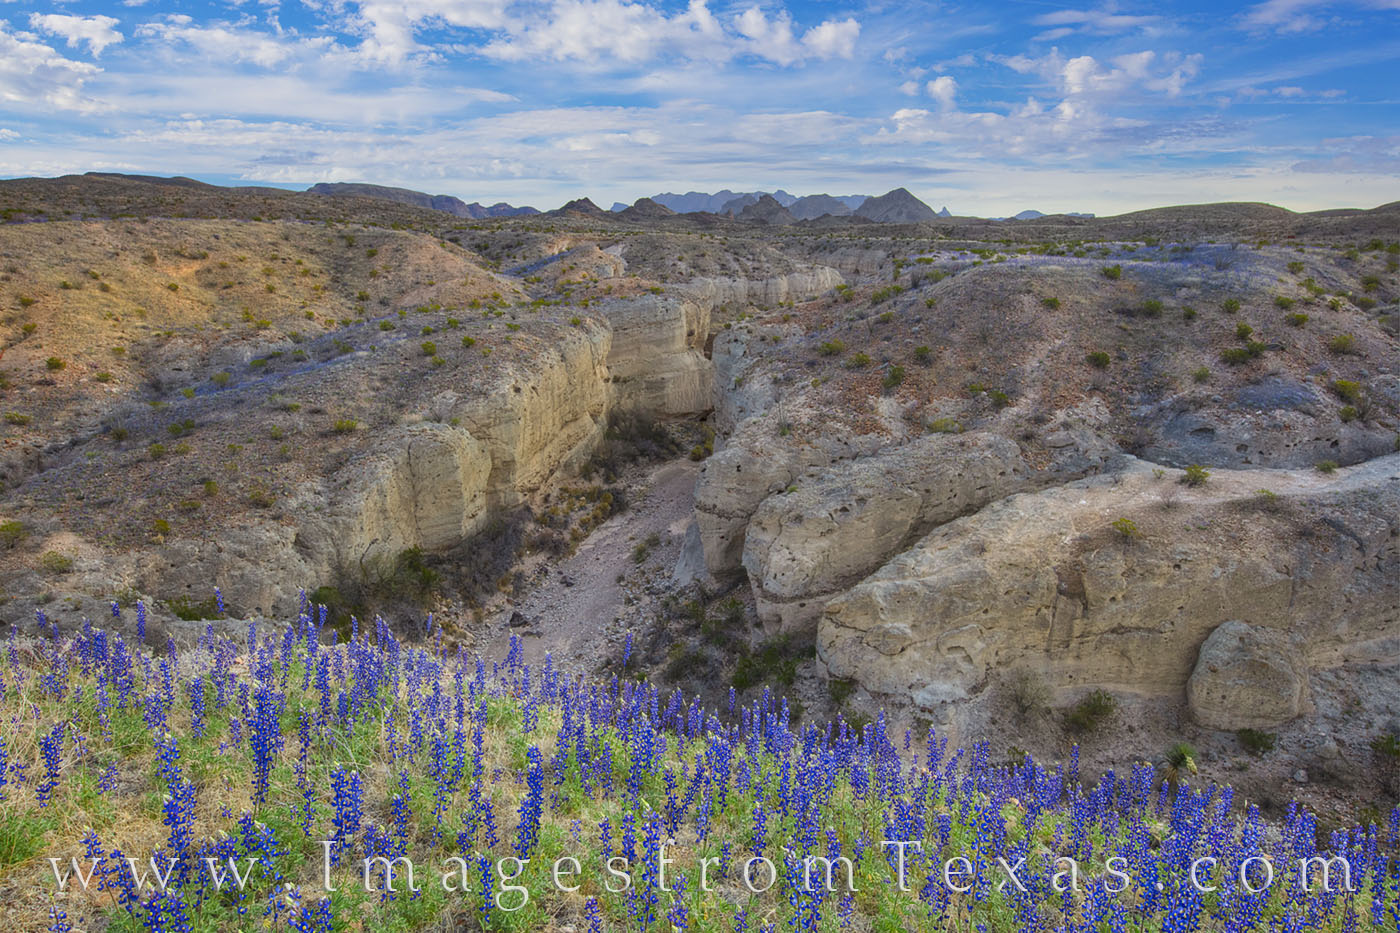 Clinging to the edge of a steep and deep cliff along the walls of Tuff Canyon, these bluebonnets add color to a remarkable landscape...